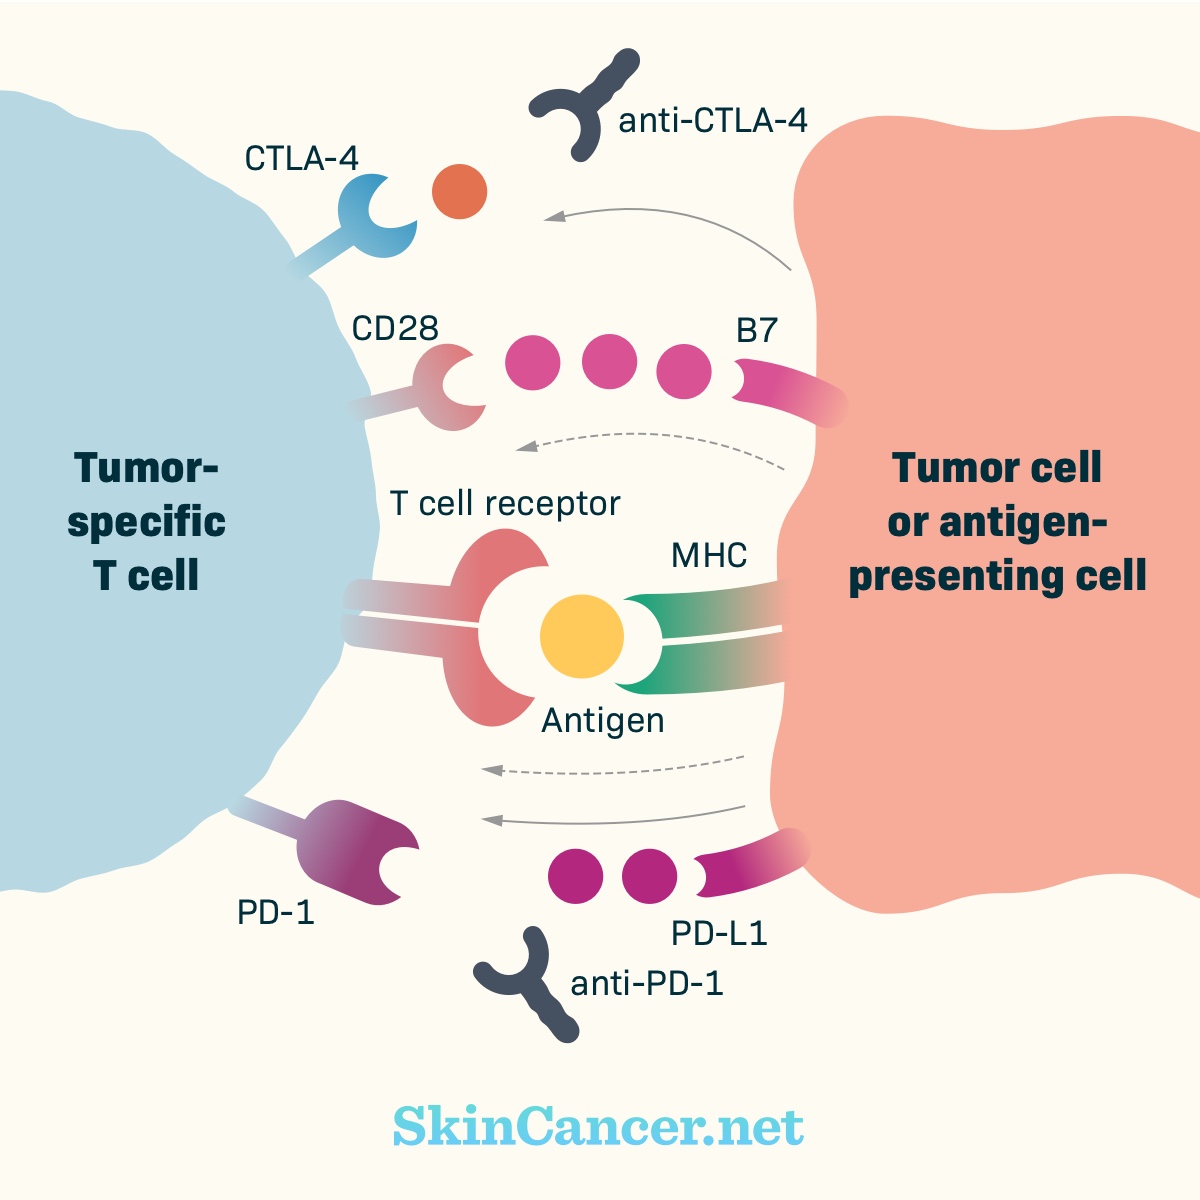 A tumor specific T-cell and tumor or antigen-presenting cell communicating